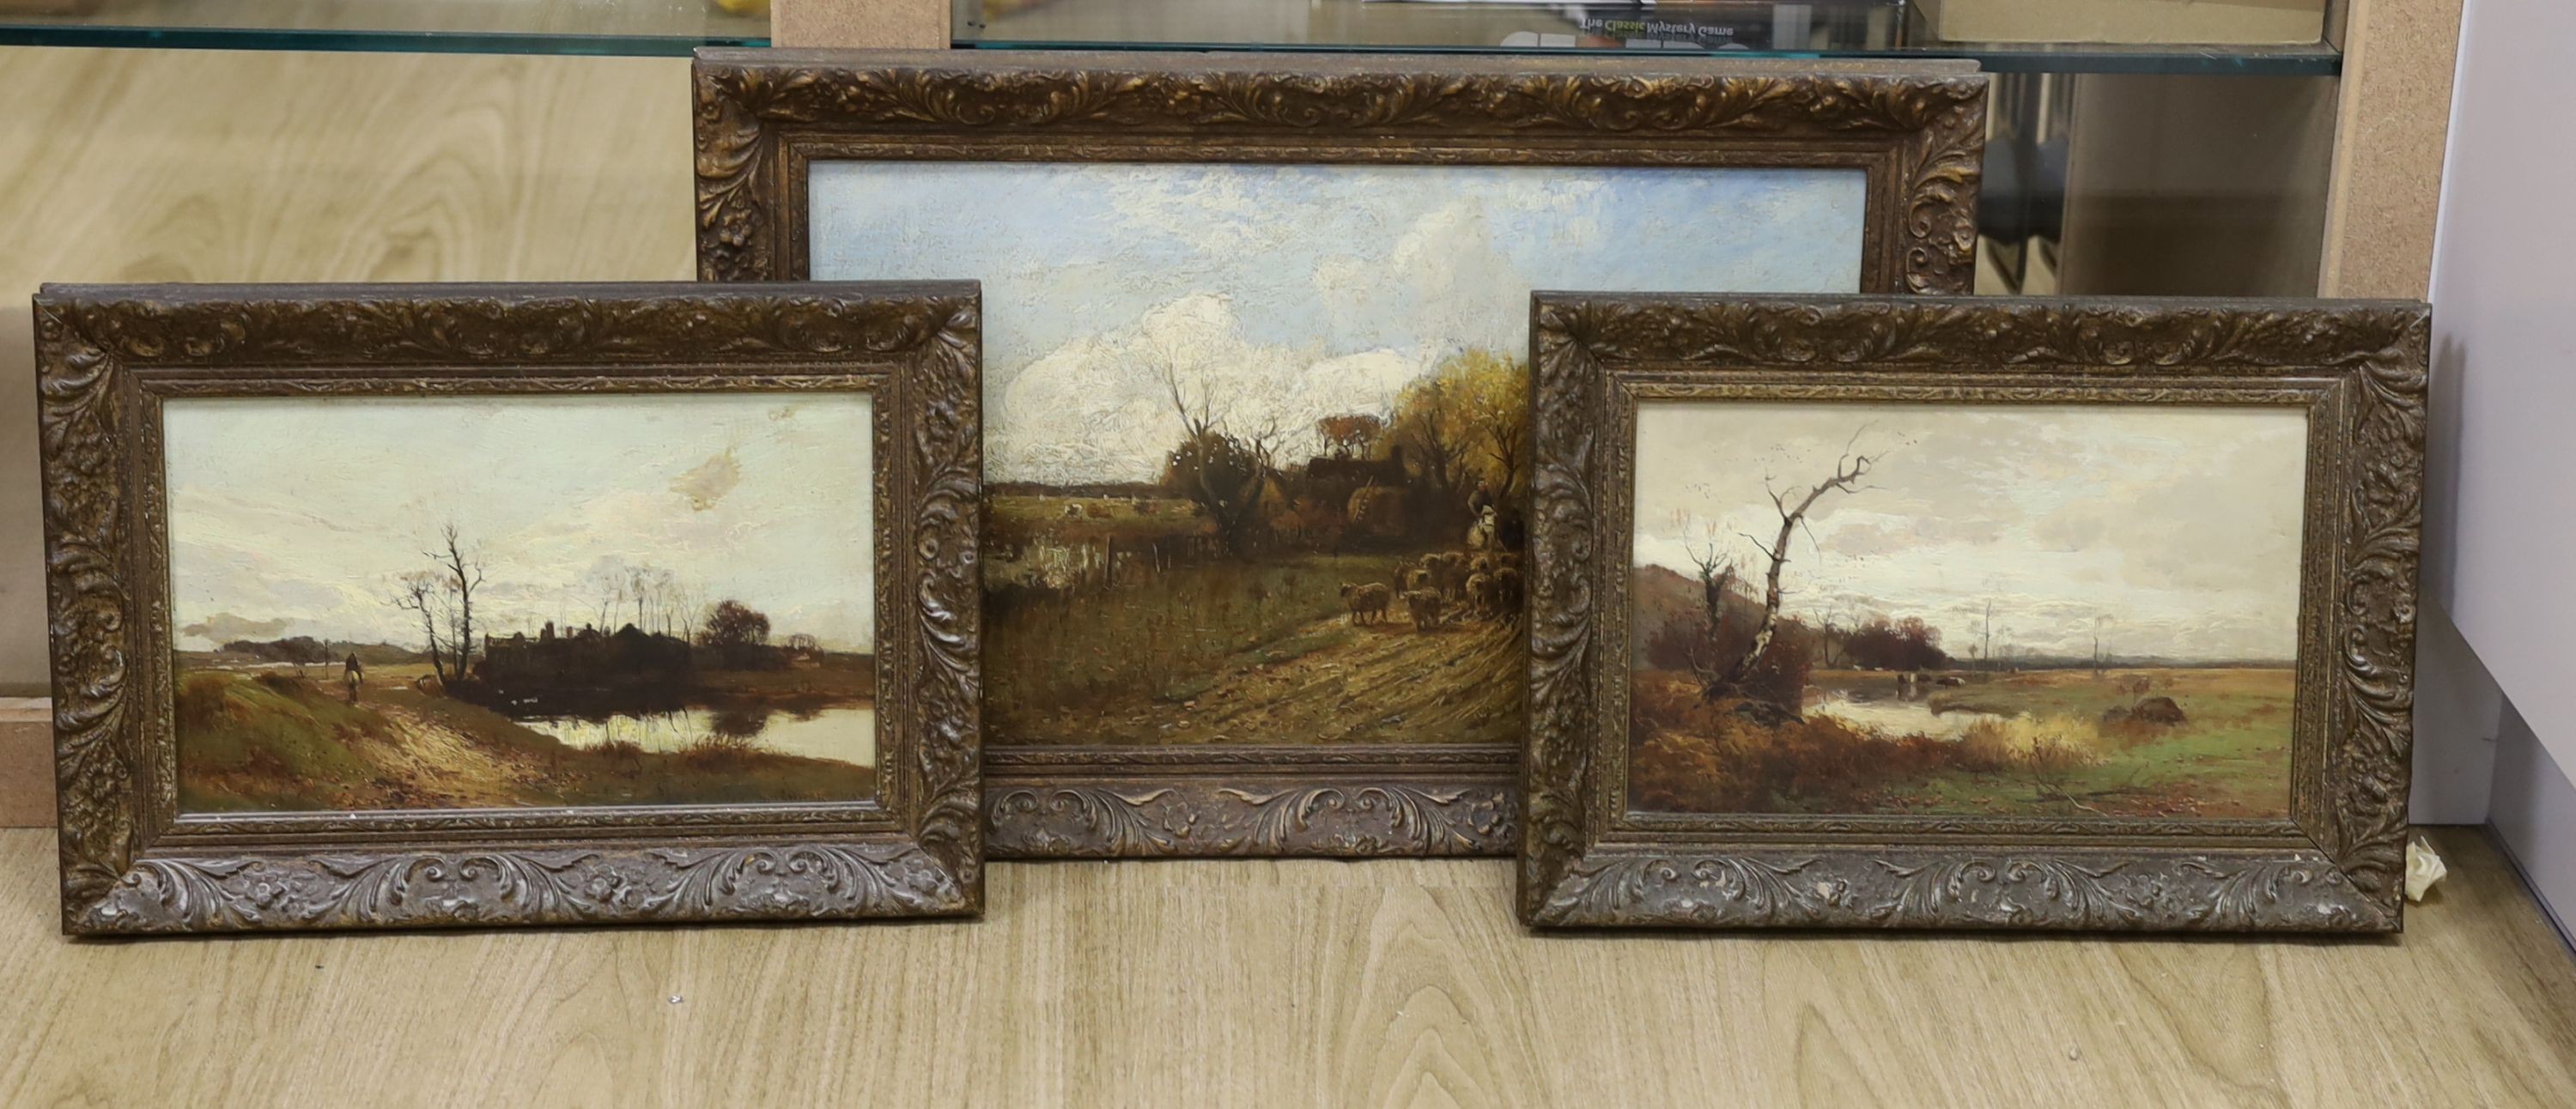 William Manners (1860-1930), three oils on panel, River landscapes, signed and dated 1891/93, 30 x 48cm and 19 x 31cm